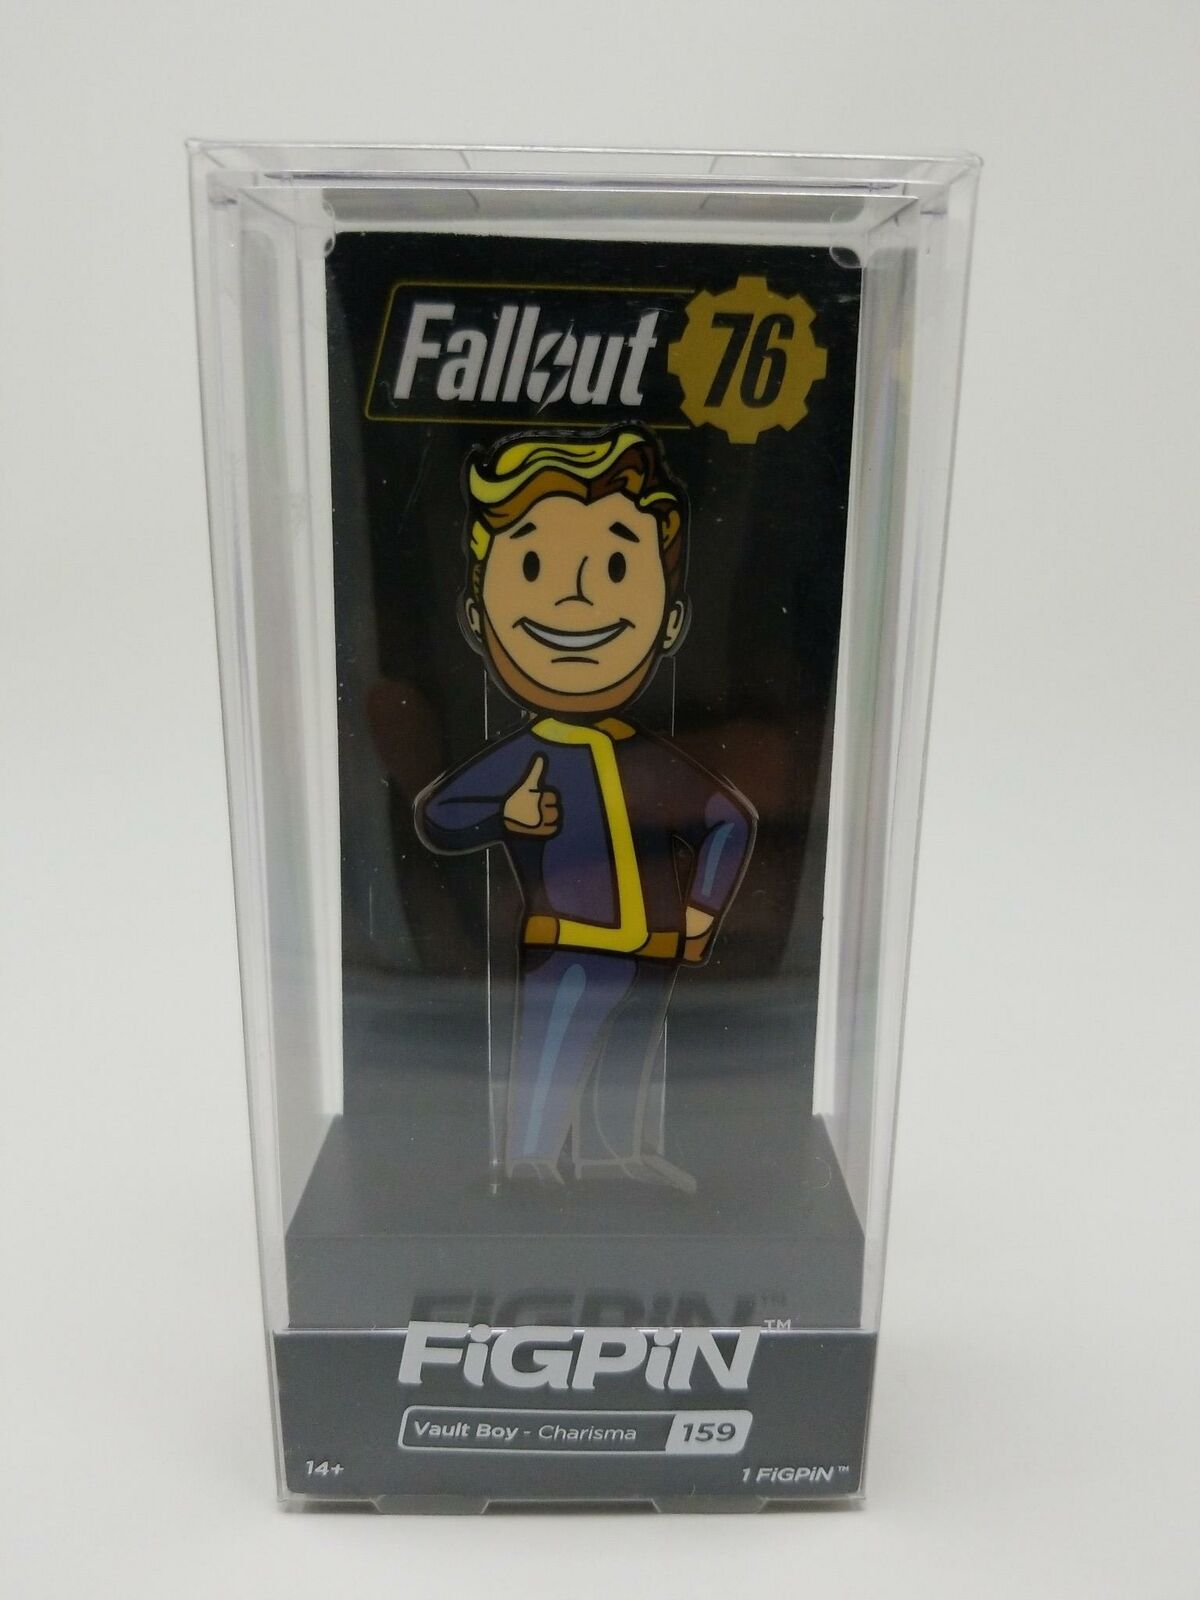 Fallout 76 FigPin 159 Vault Boy Charisma SPECIAL Series Limited to 1000